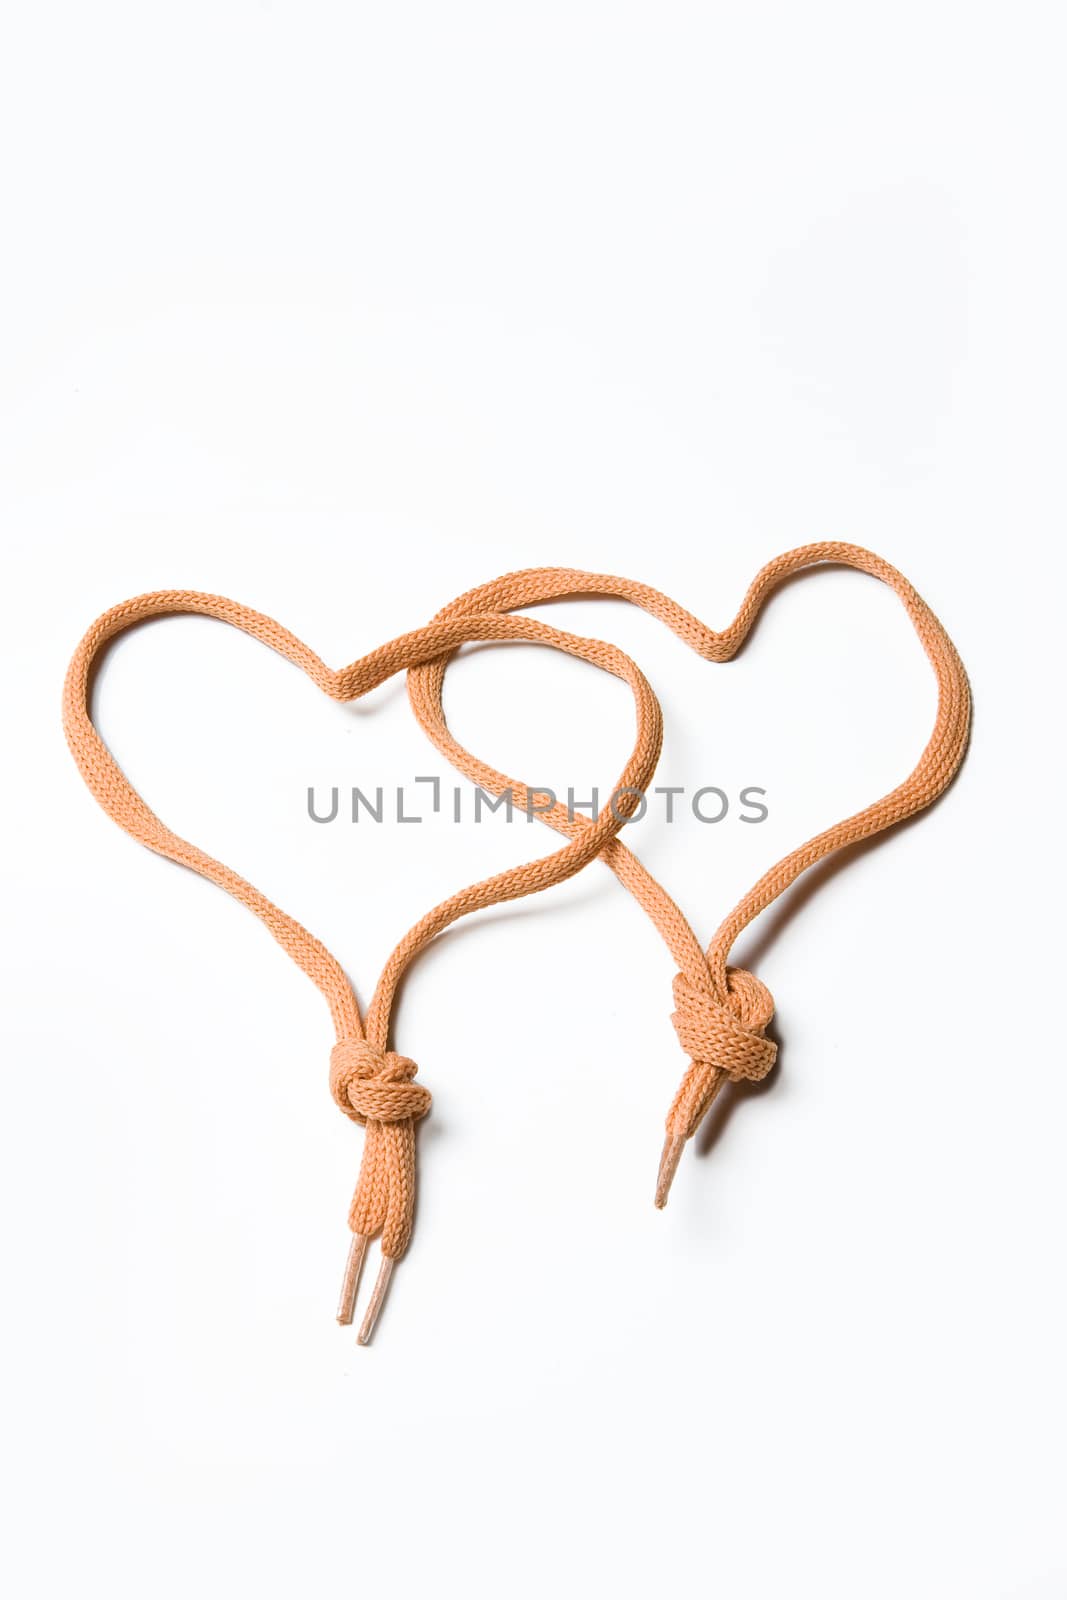 Two shoelaces in the shape of heart